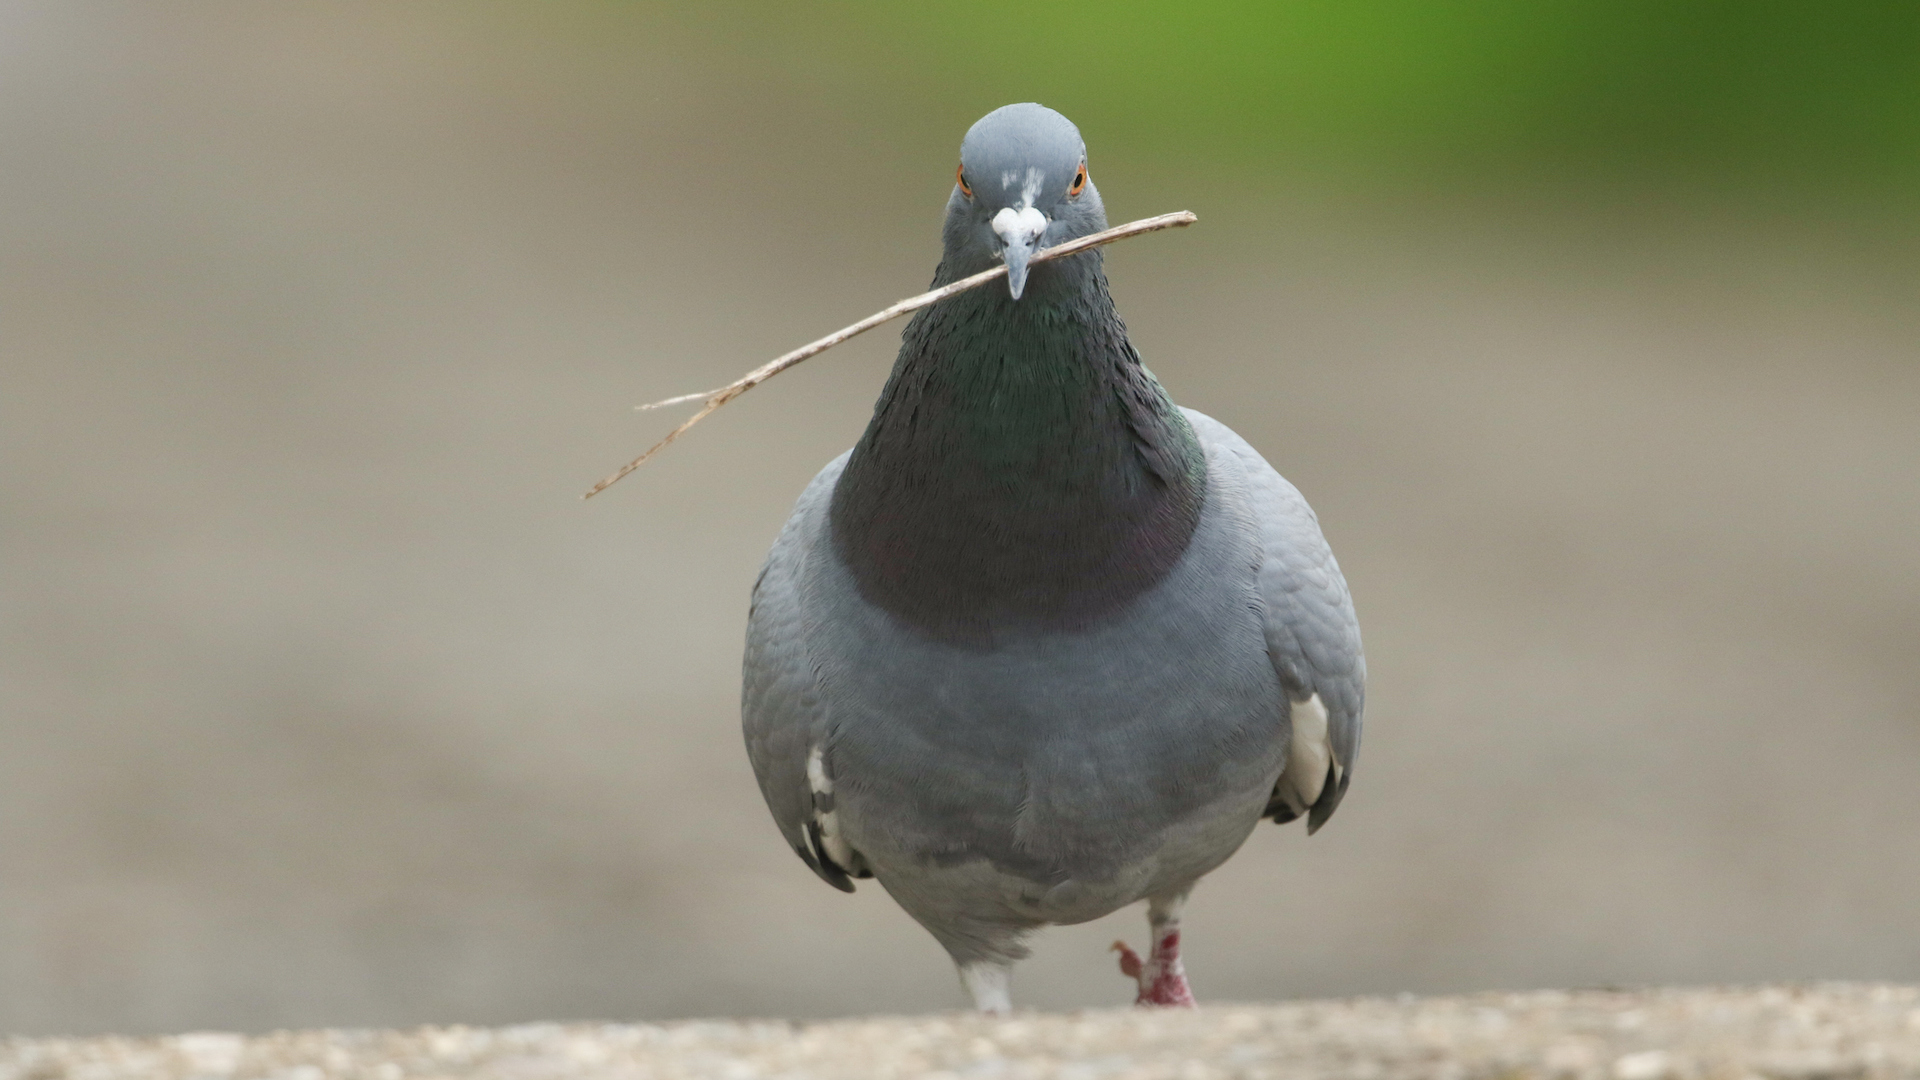 A photograph of a pigeon walking on the road with a stick in its beak